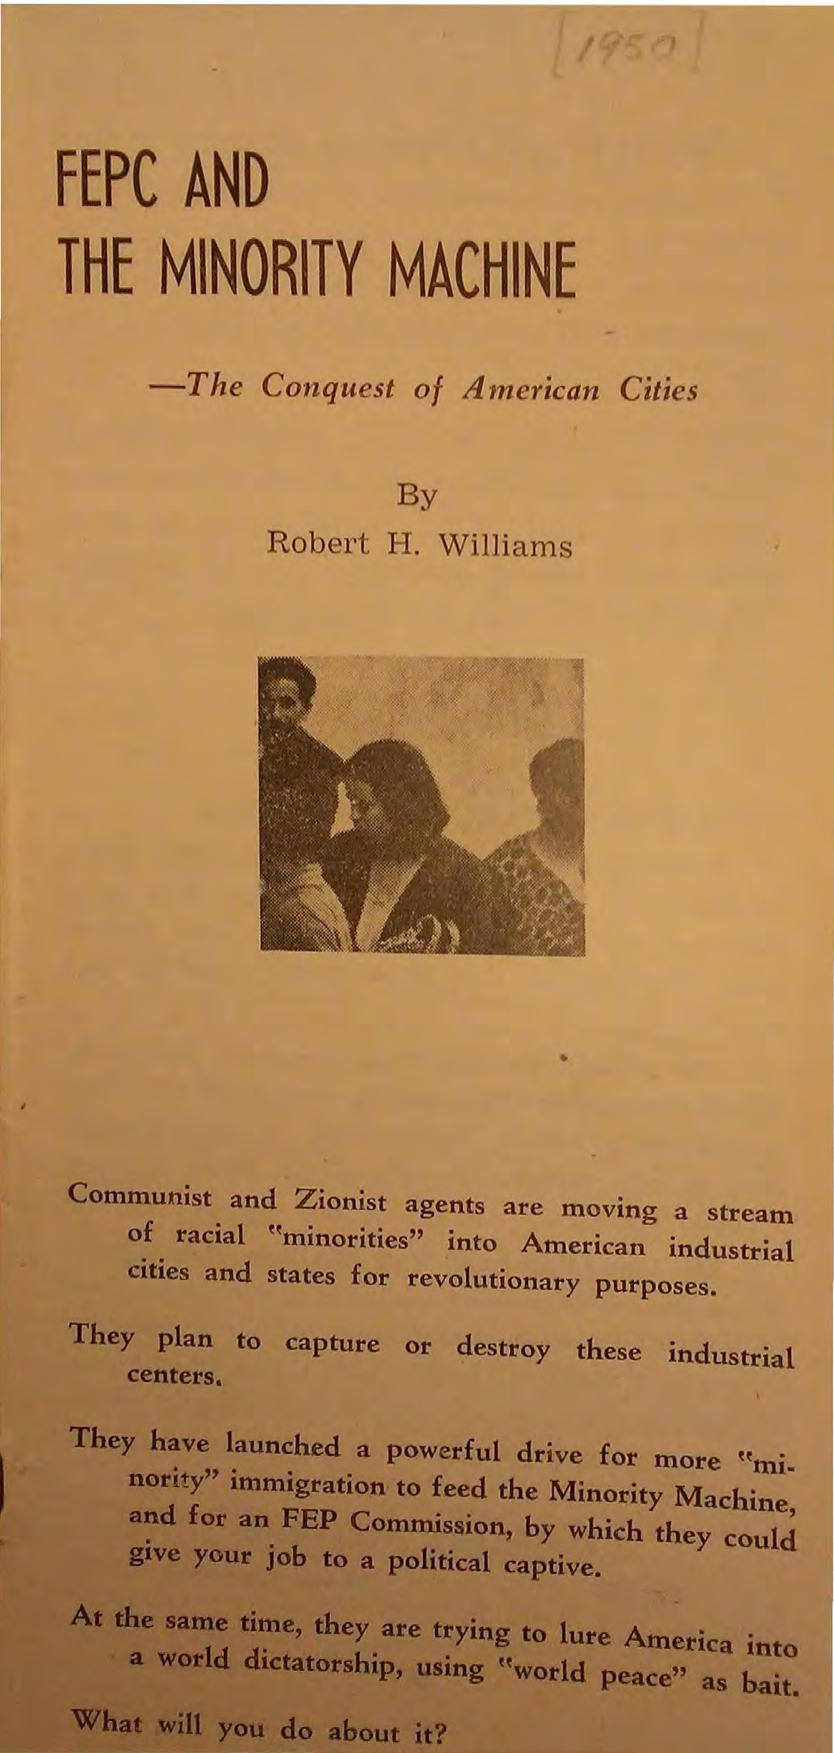 FEPC and the Minority Machine - The Conquest Of American Cities (1950) by R. H. Williams